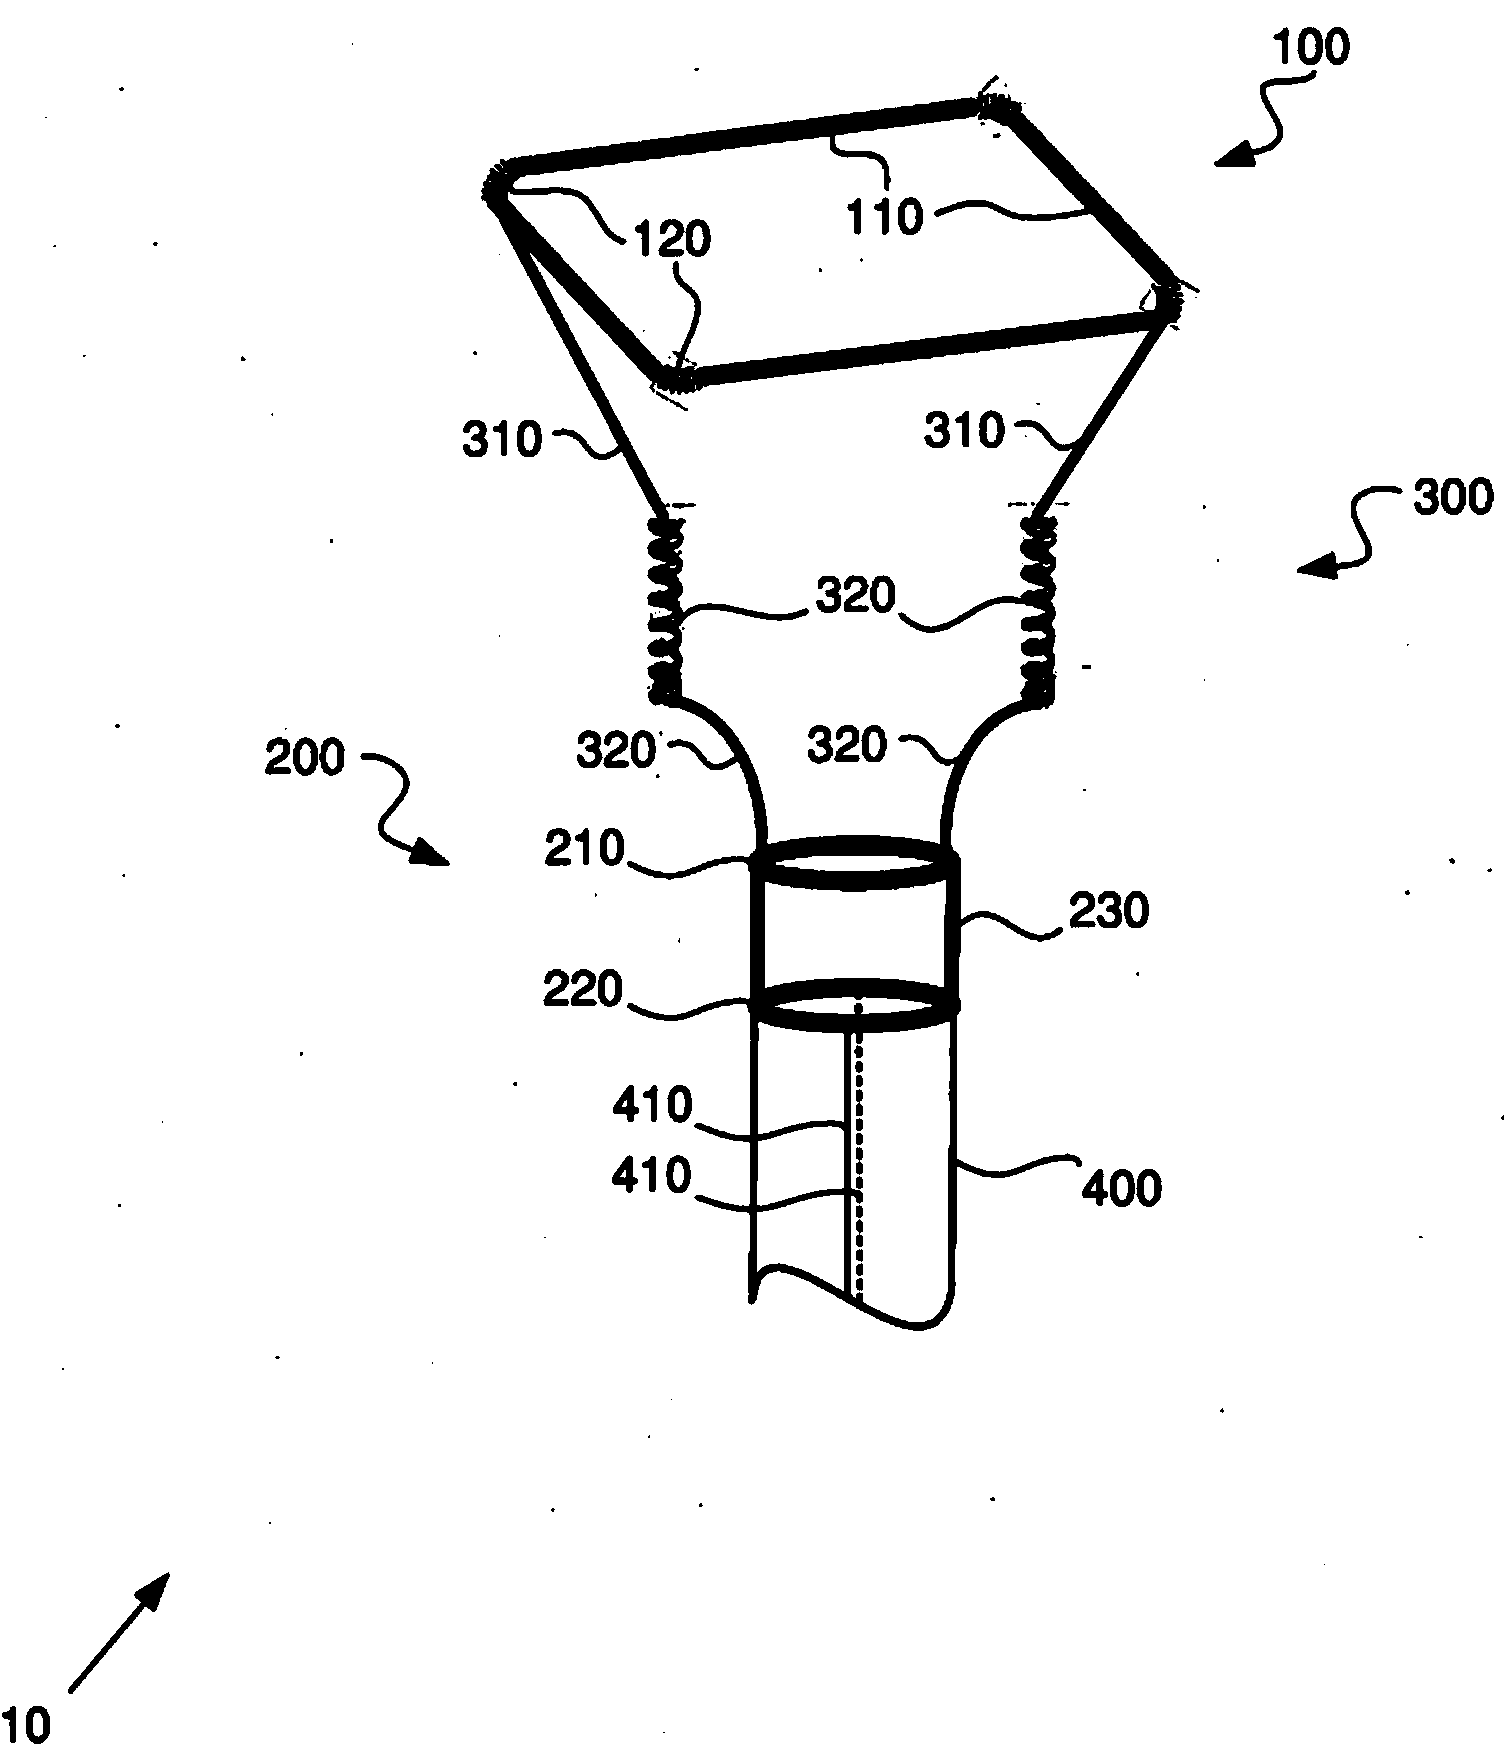 Anchoring and delivery system for a gastro-duodenal implant